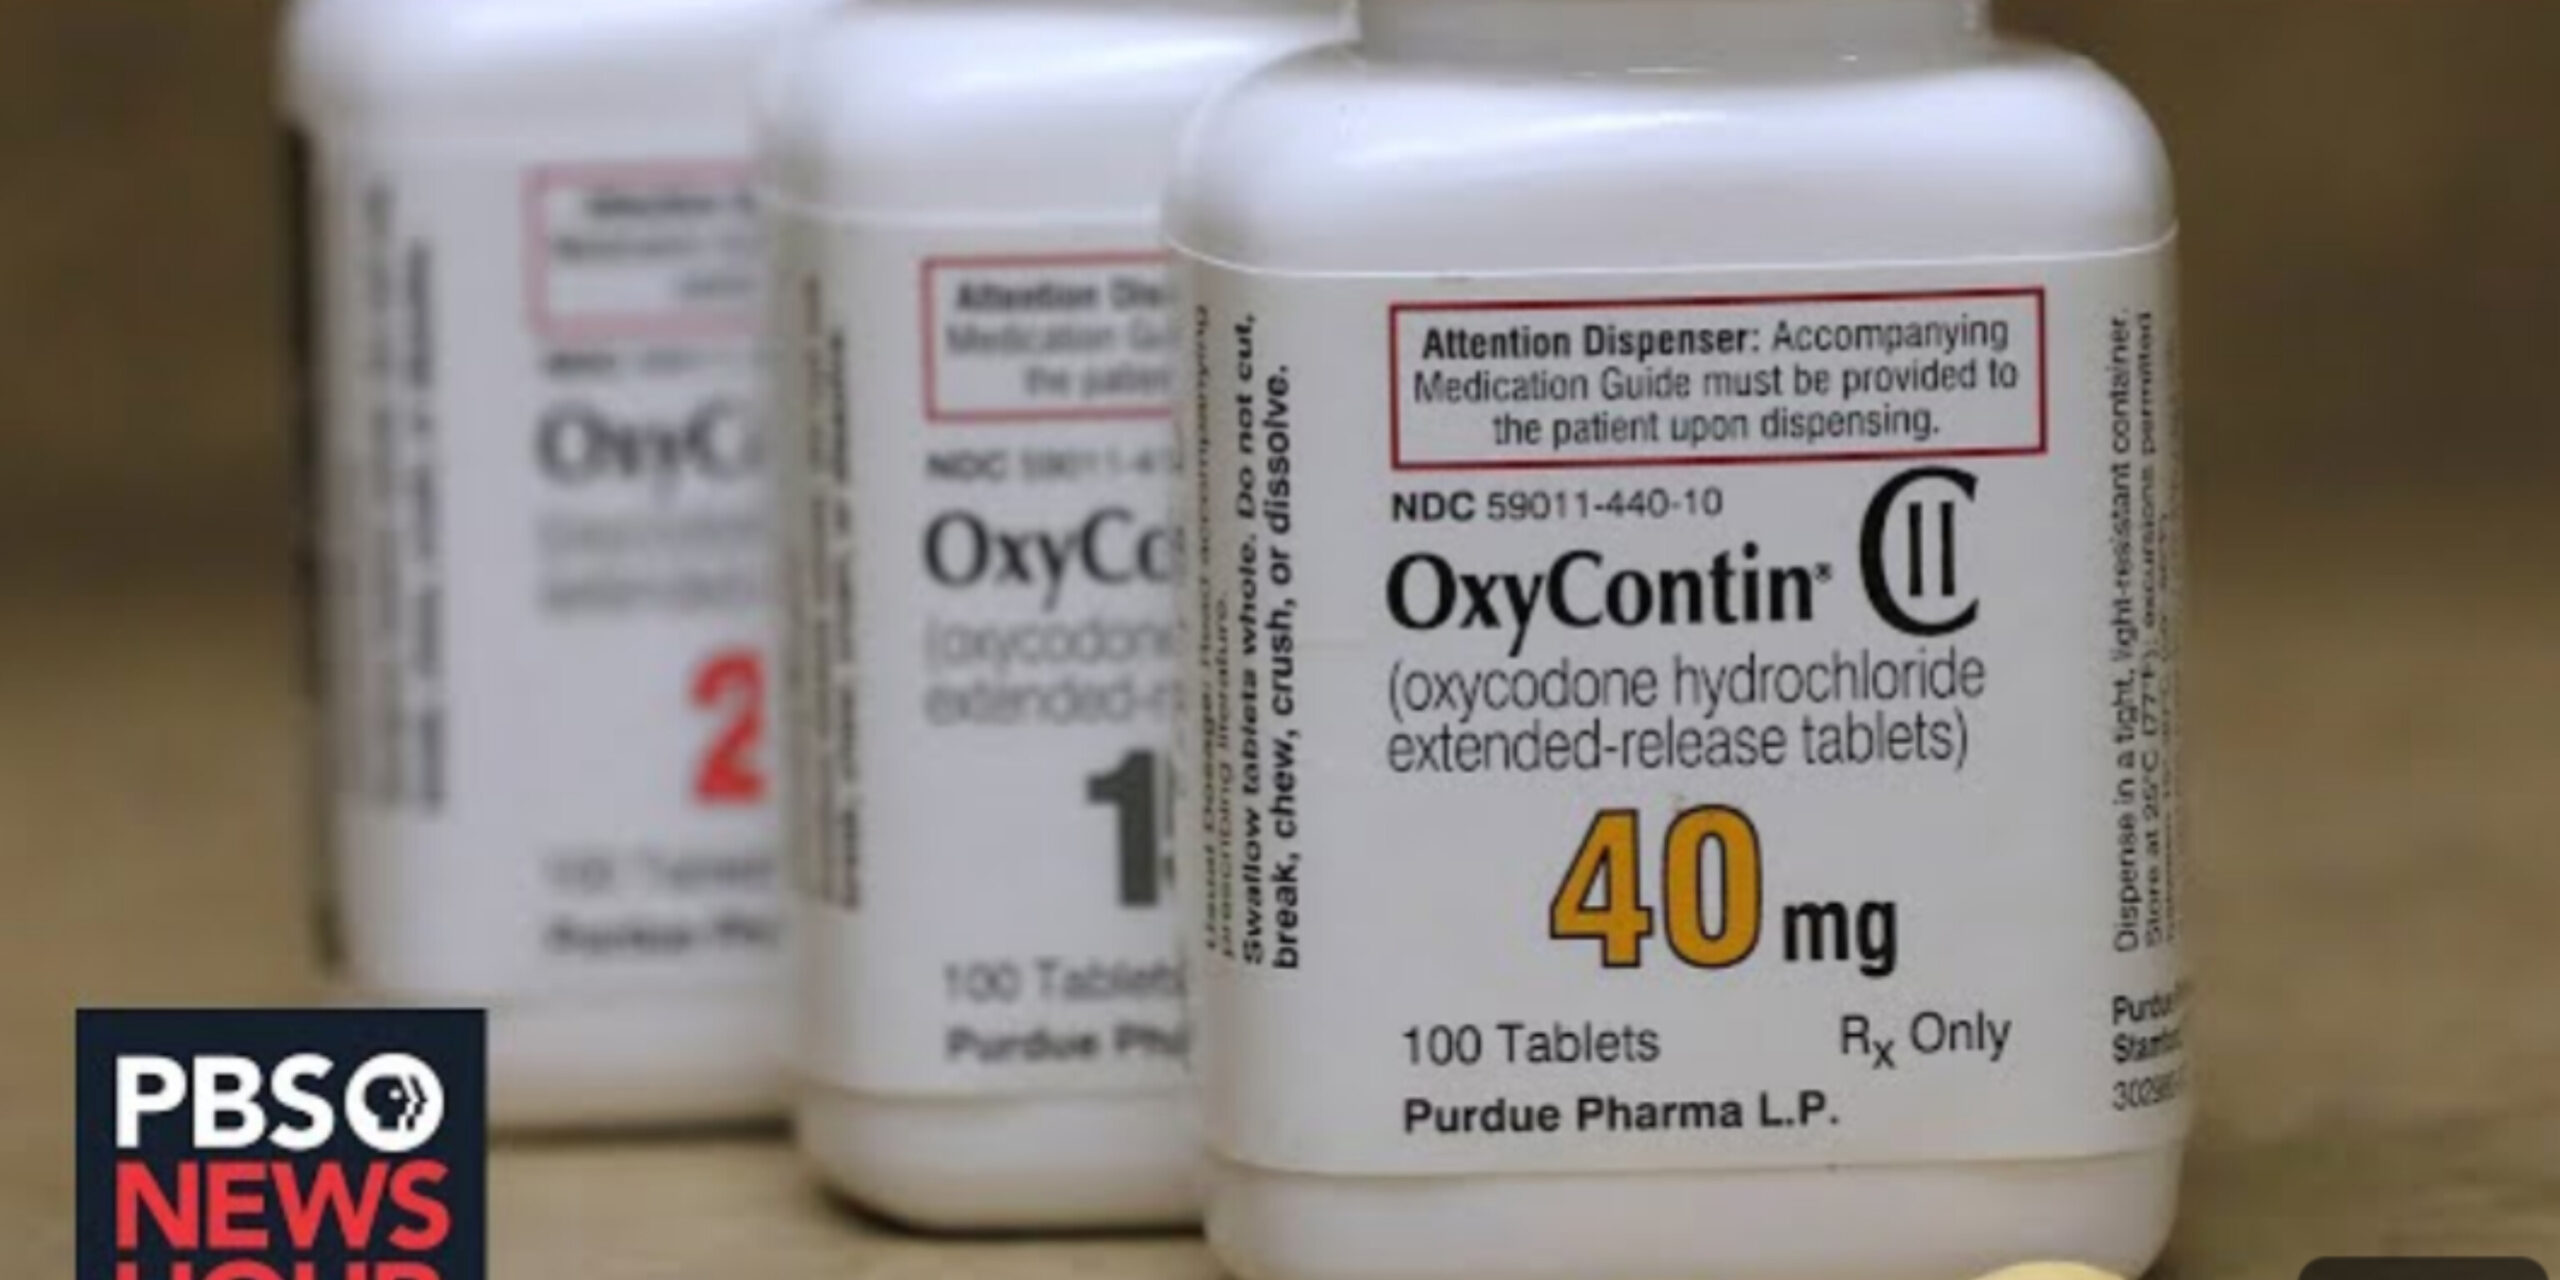 OxyContin: Uses and Side Effects